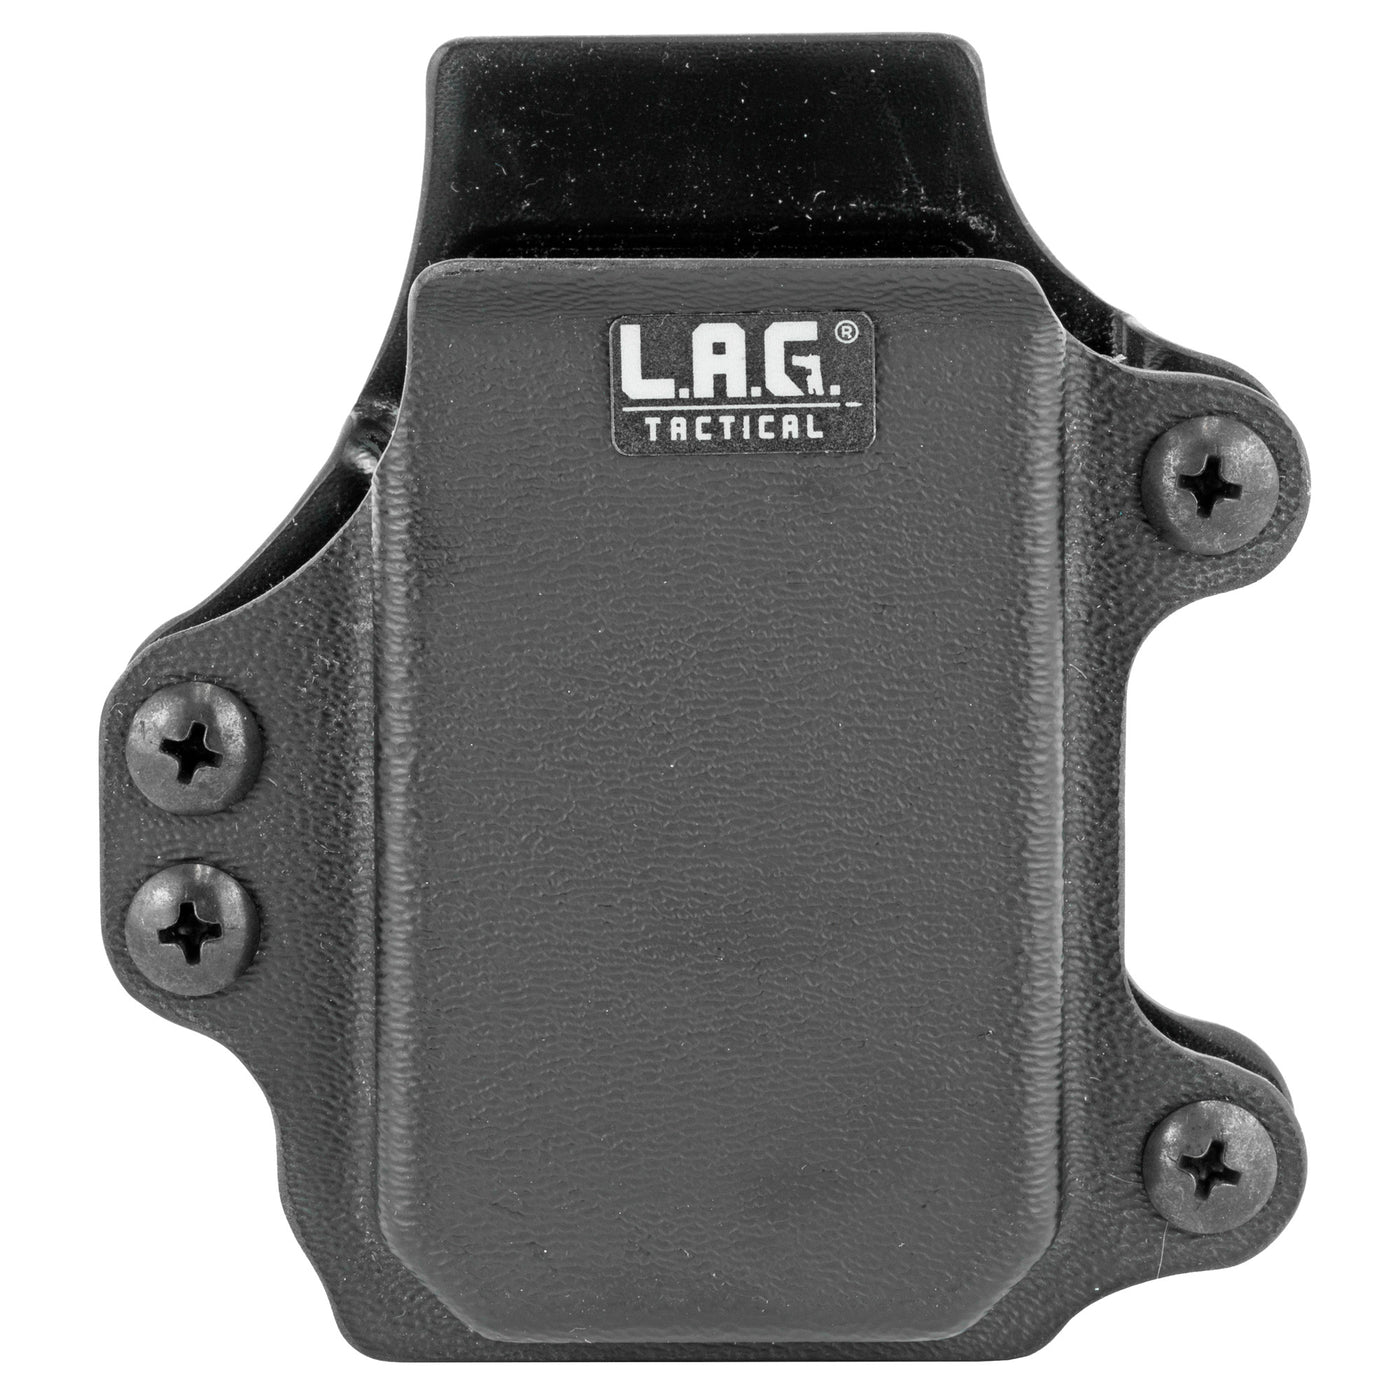 Lag Srmc Mag Carrier Pcc 9mm Blk